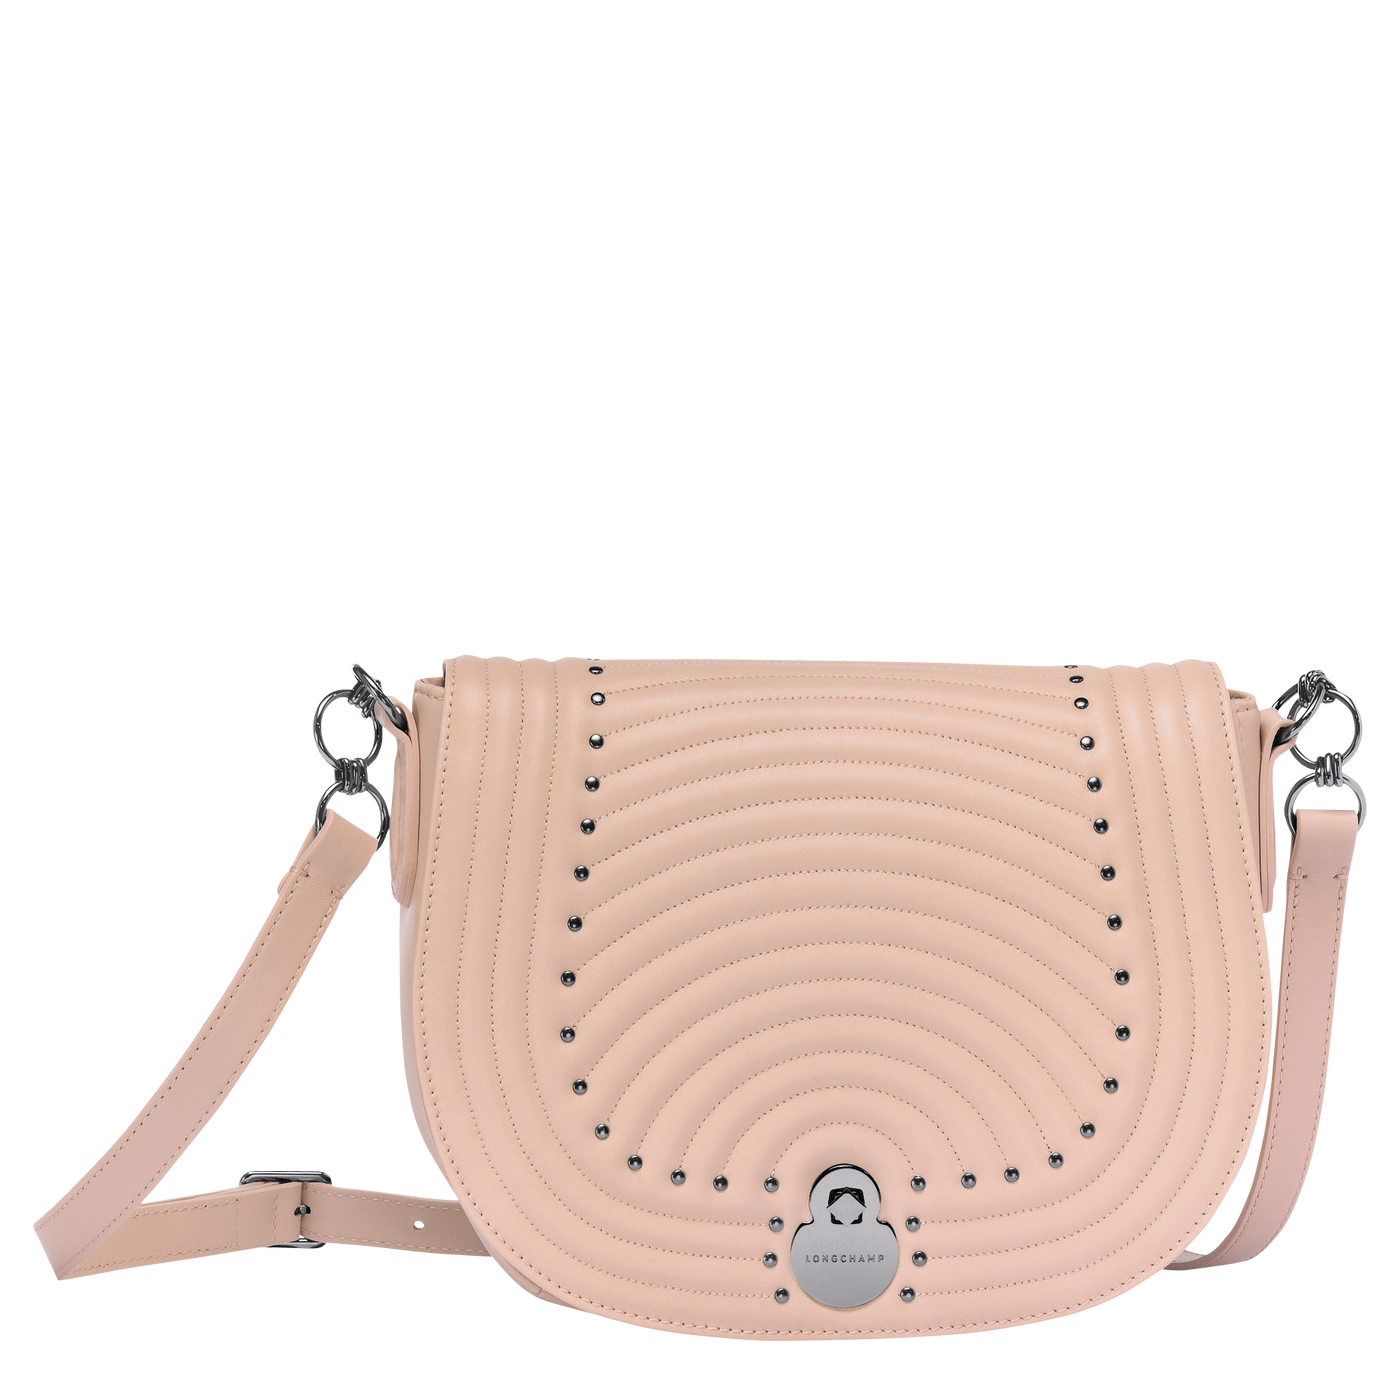 Shop The Latest Collection Of Outlet - Longchamp Cavalcade Matelasse Cross Body Bag-1396Hlo In Lebanon